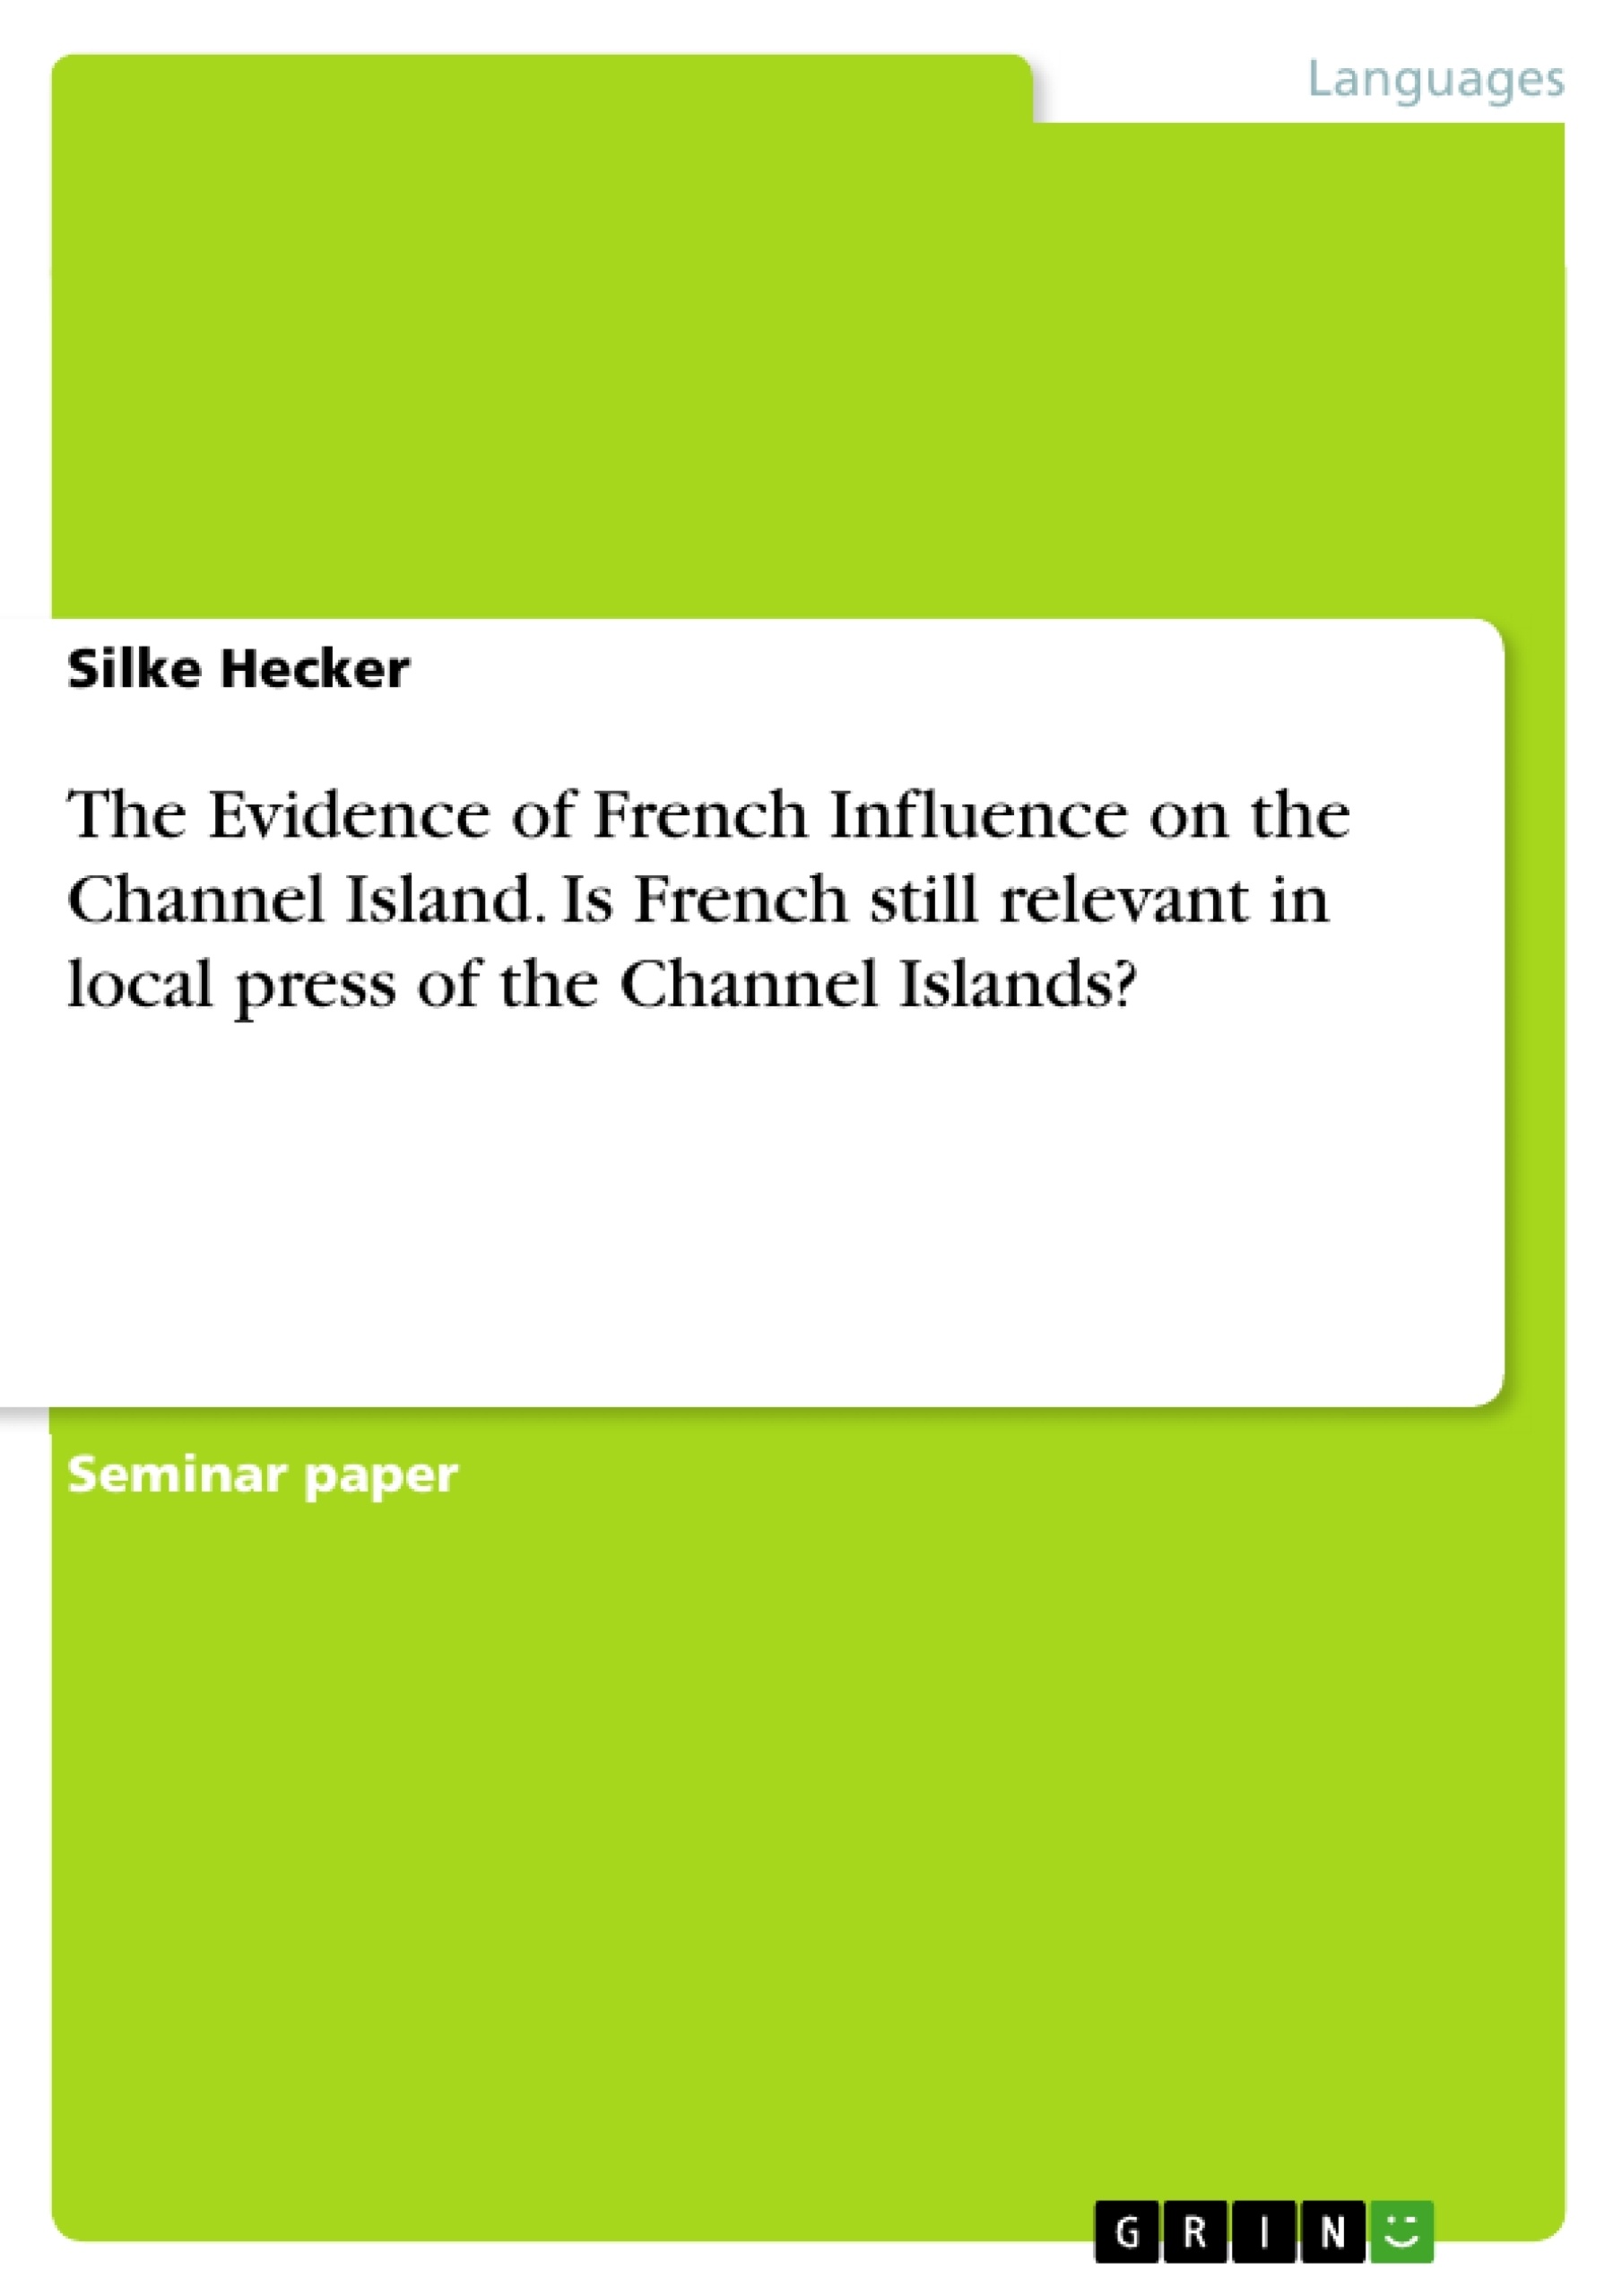 Título: The Evidence of French Influence on the Channel Island. Is French still relevant in local press of the Channel Islands?